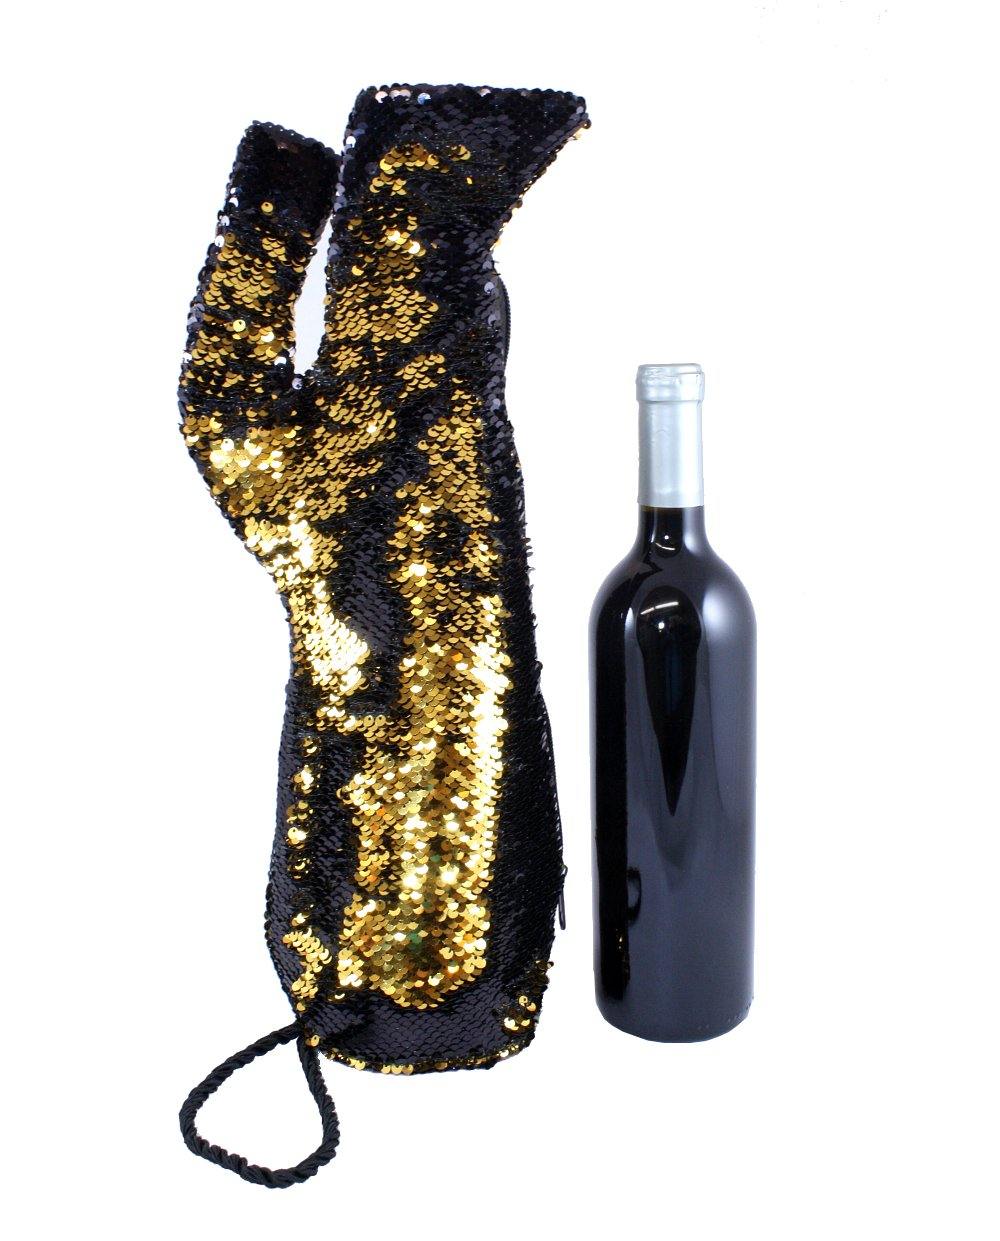 Stiletto Wine Bag in Black and Gold Reversible Mermaid Sequin Fabric - Tipsy Totes | Wine Gifts | Beer Koozies | Wine Totes | Simply Fabulous